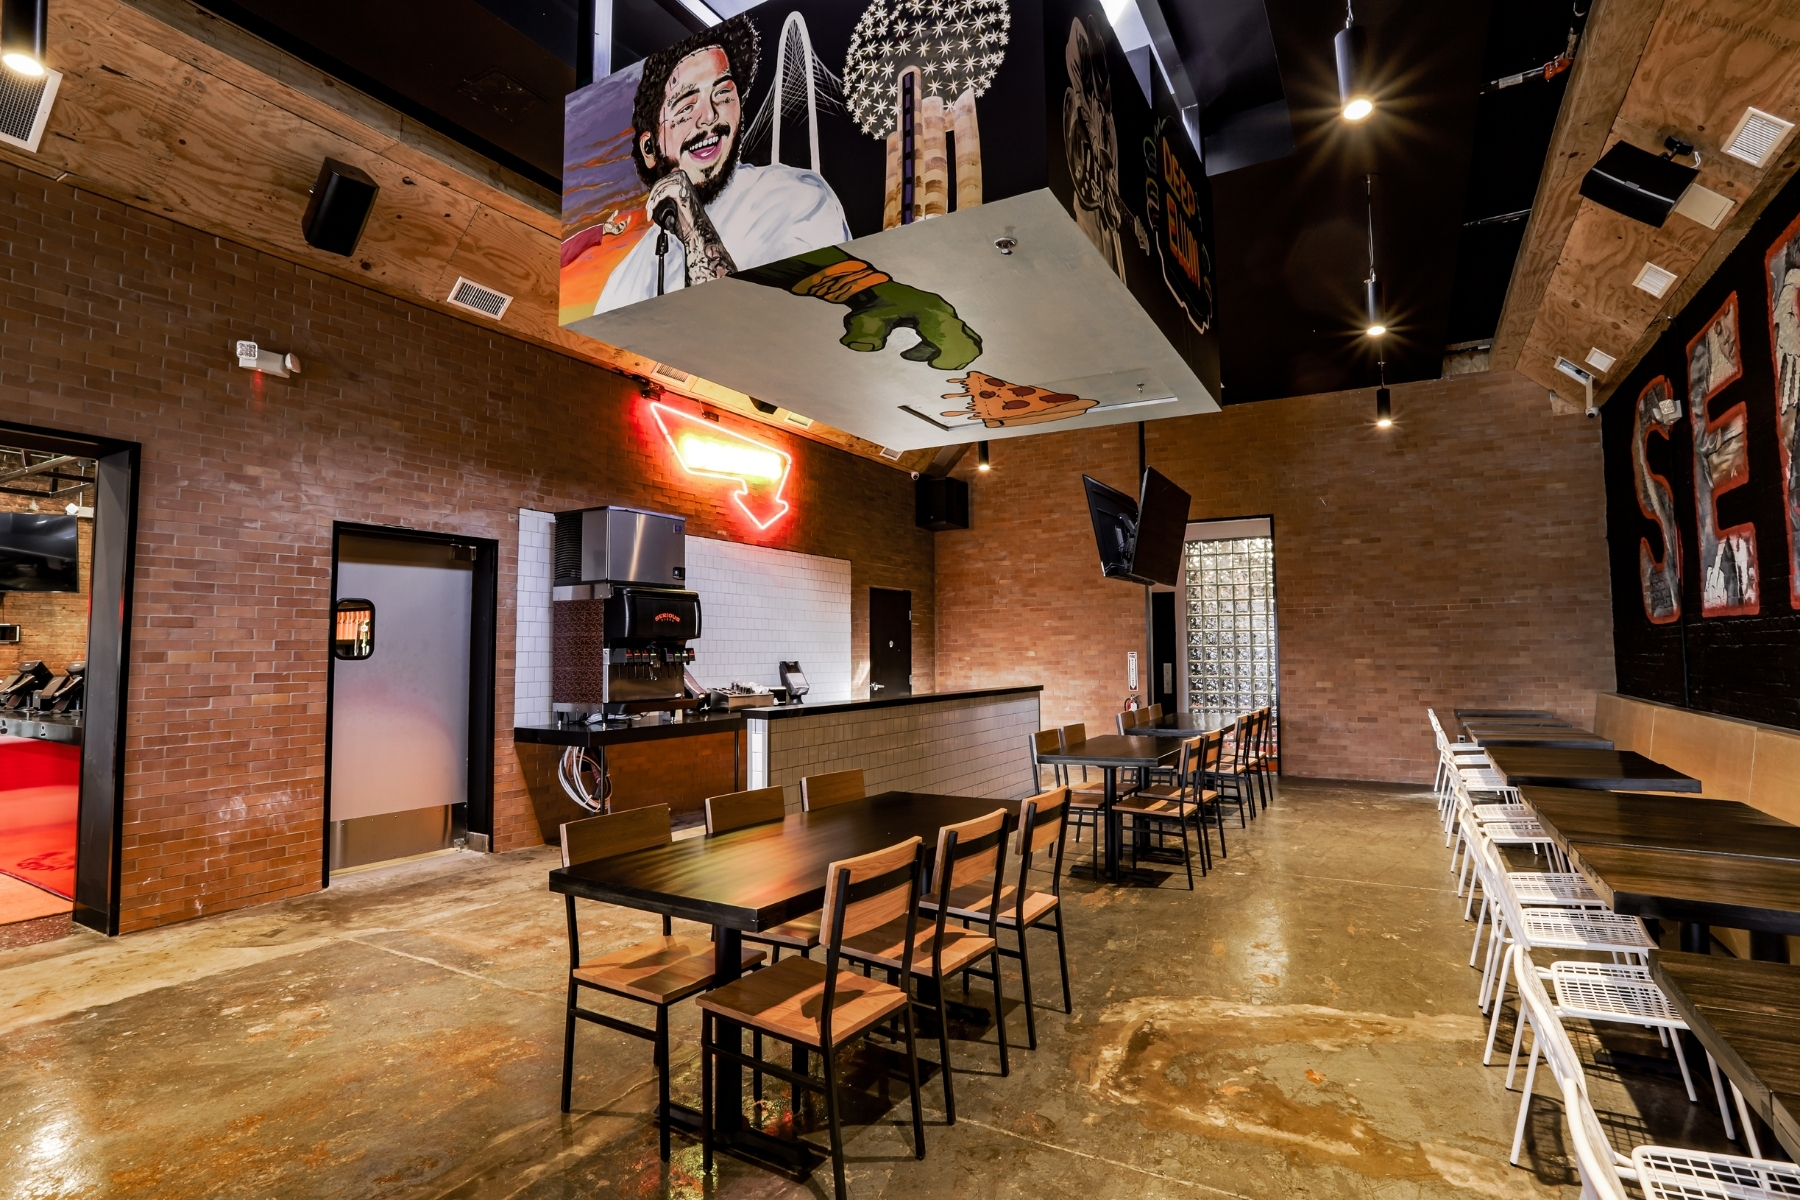 The empty, remodeled interior of Serious Pie in Deep Ellum. A painted mural of Post Malone linger over a table with chairs in the middle of a dining room.